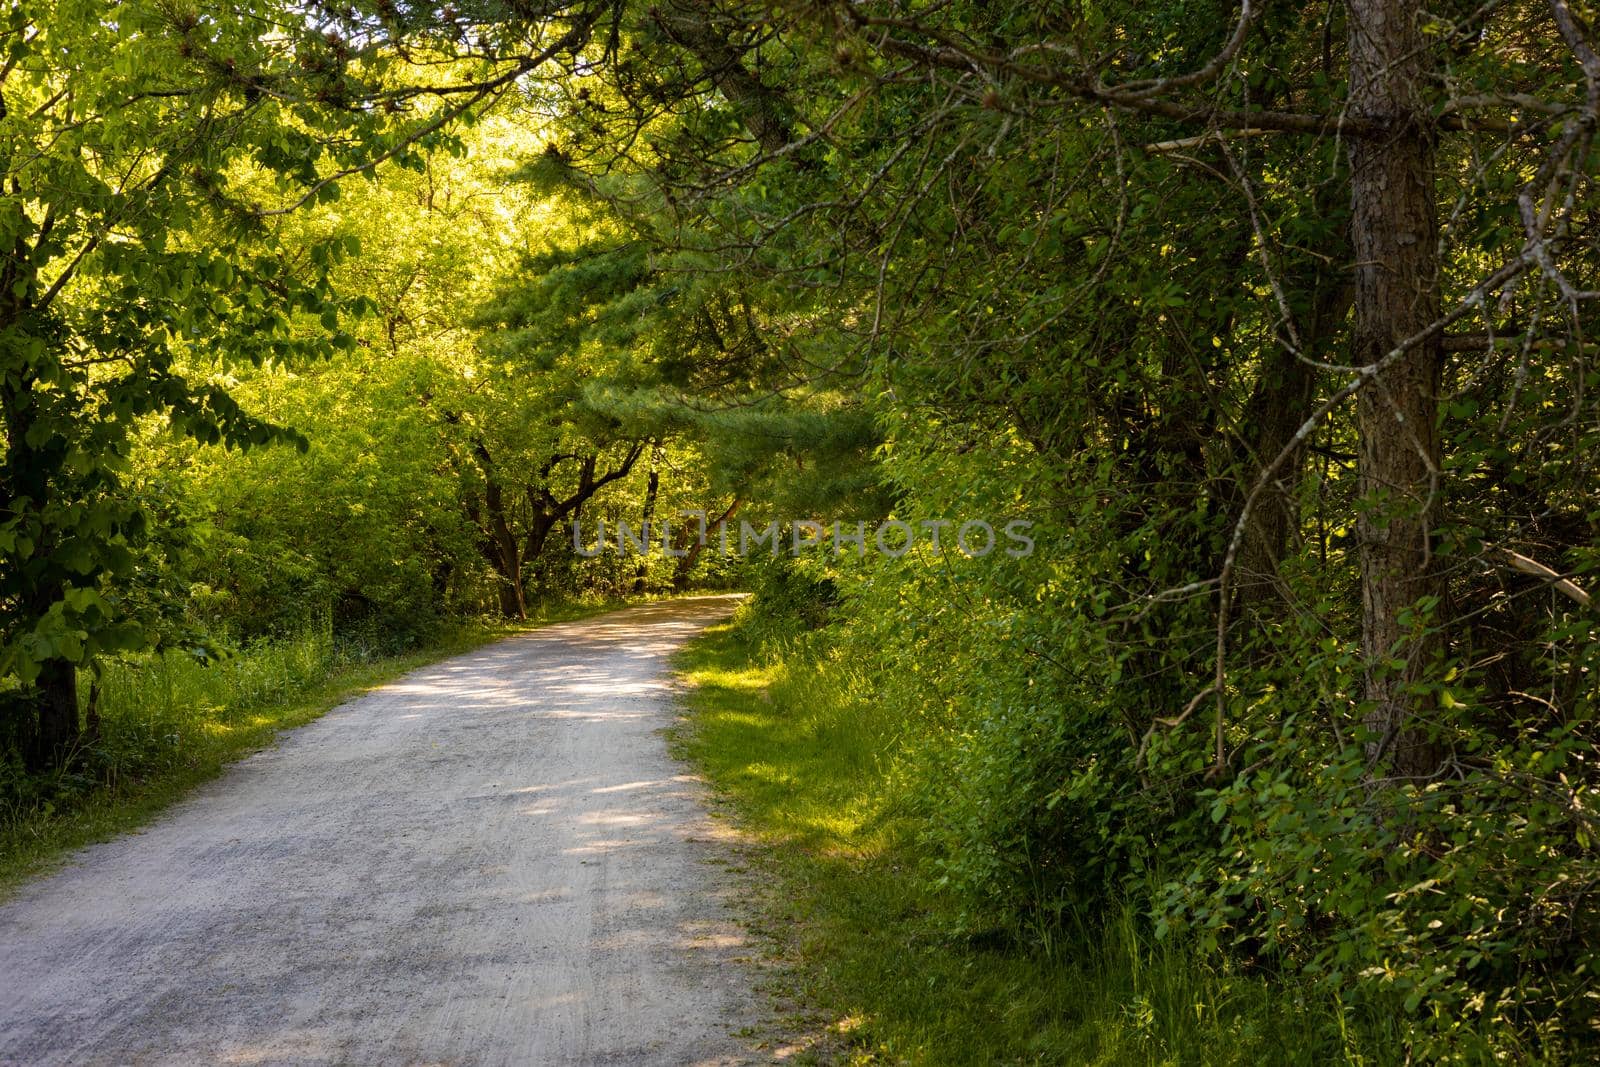 A gravel path used as a cycling and walking trail curves through the bright green foliage of the woods with golden light illuminating patches ahead.